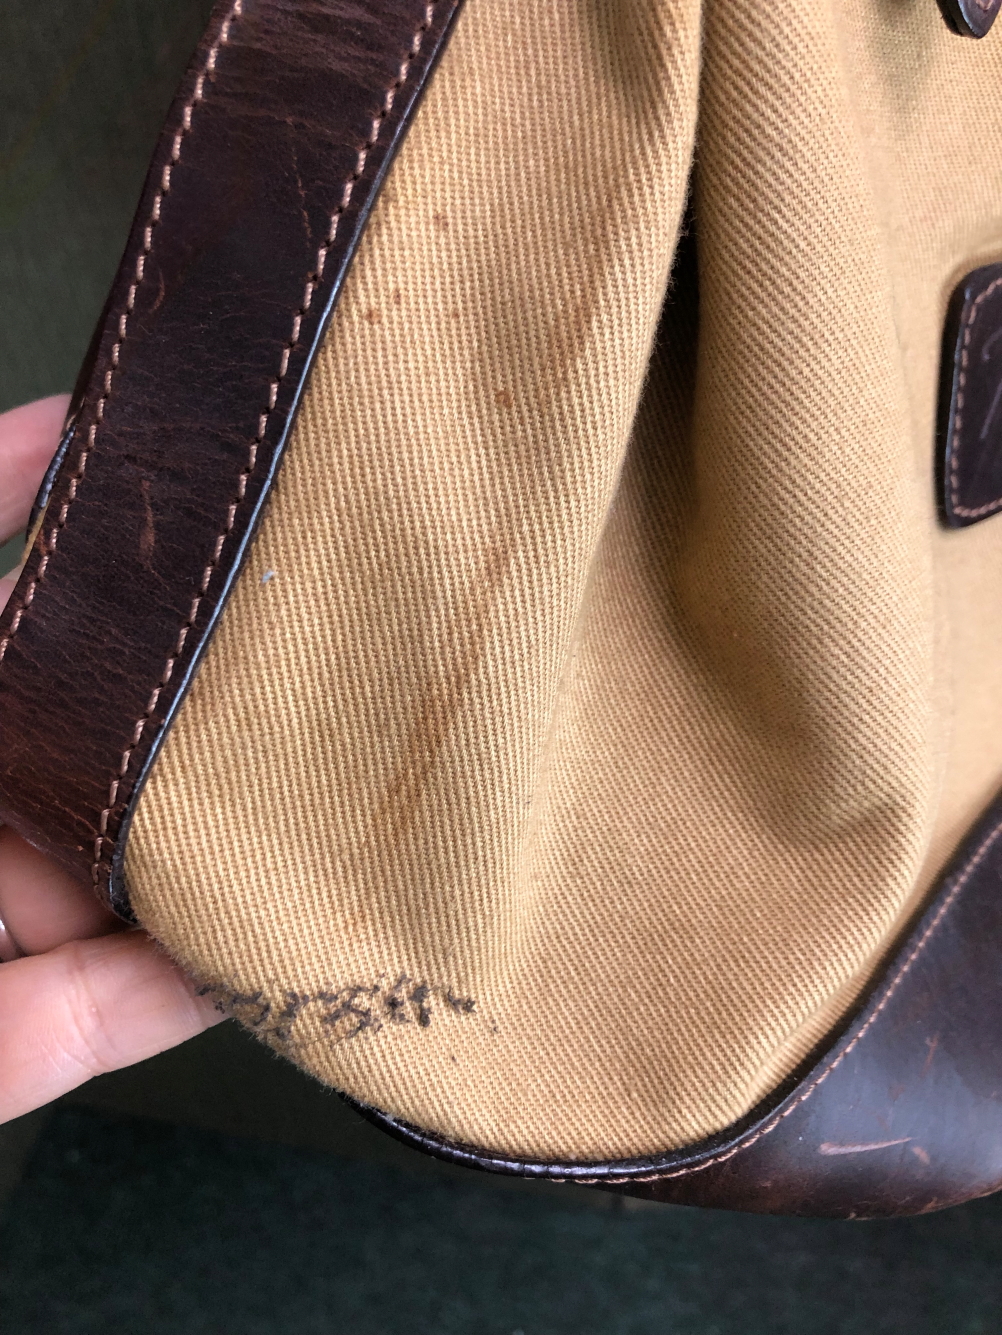 A THOMAS BURBERRY CANVAS BACK PACK. - Image 4 of 8